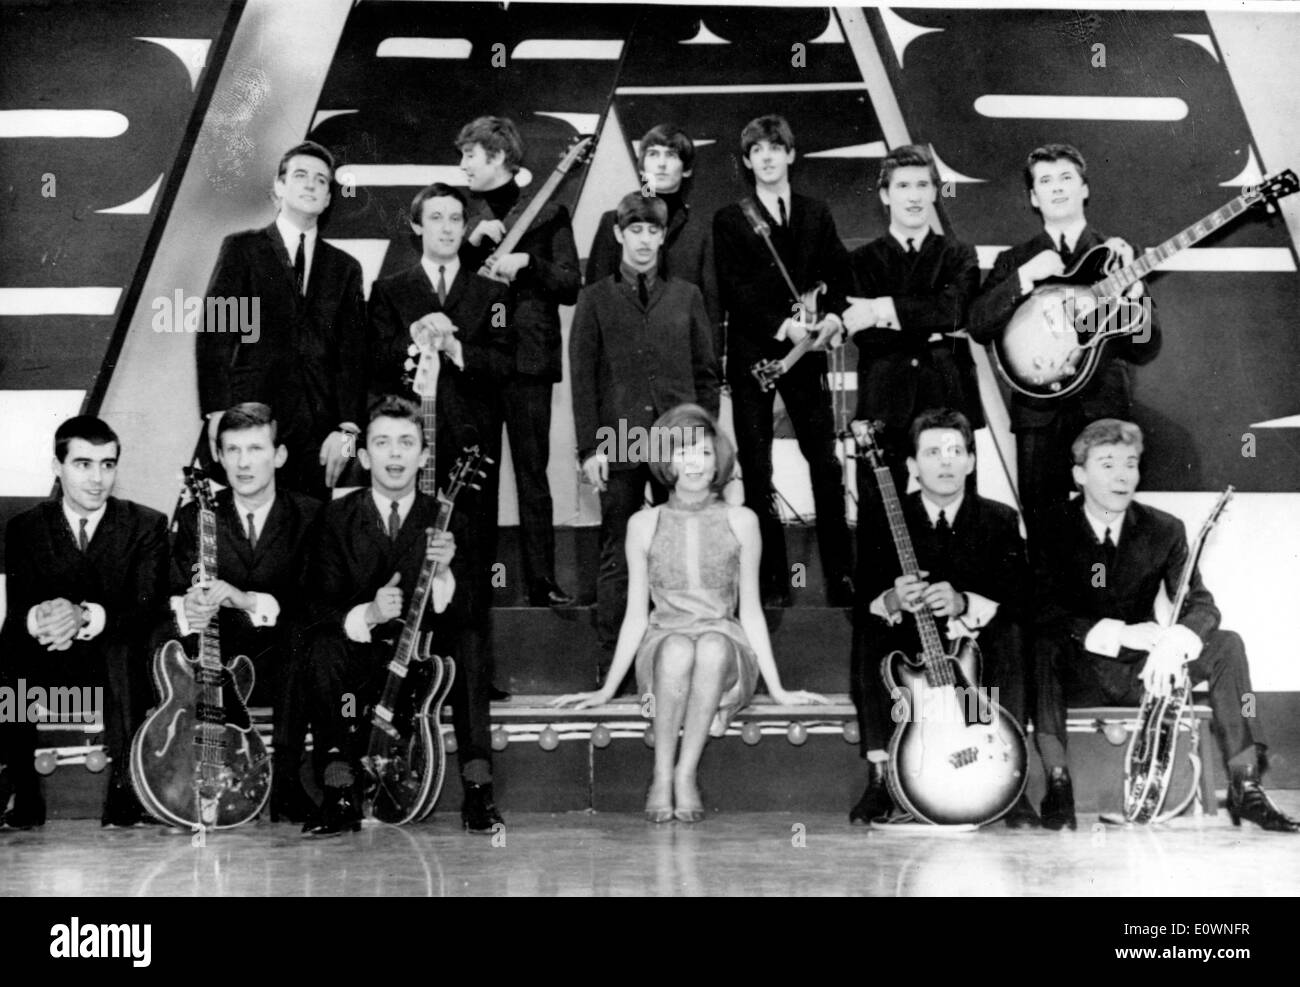 The Beatles as part of the Liverpool Sond for TV. Stock Photo